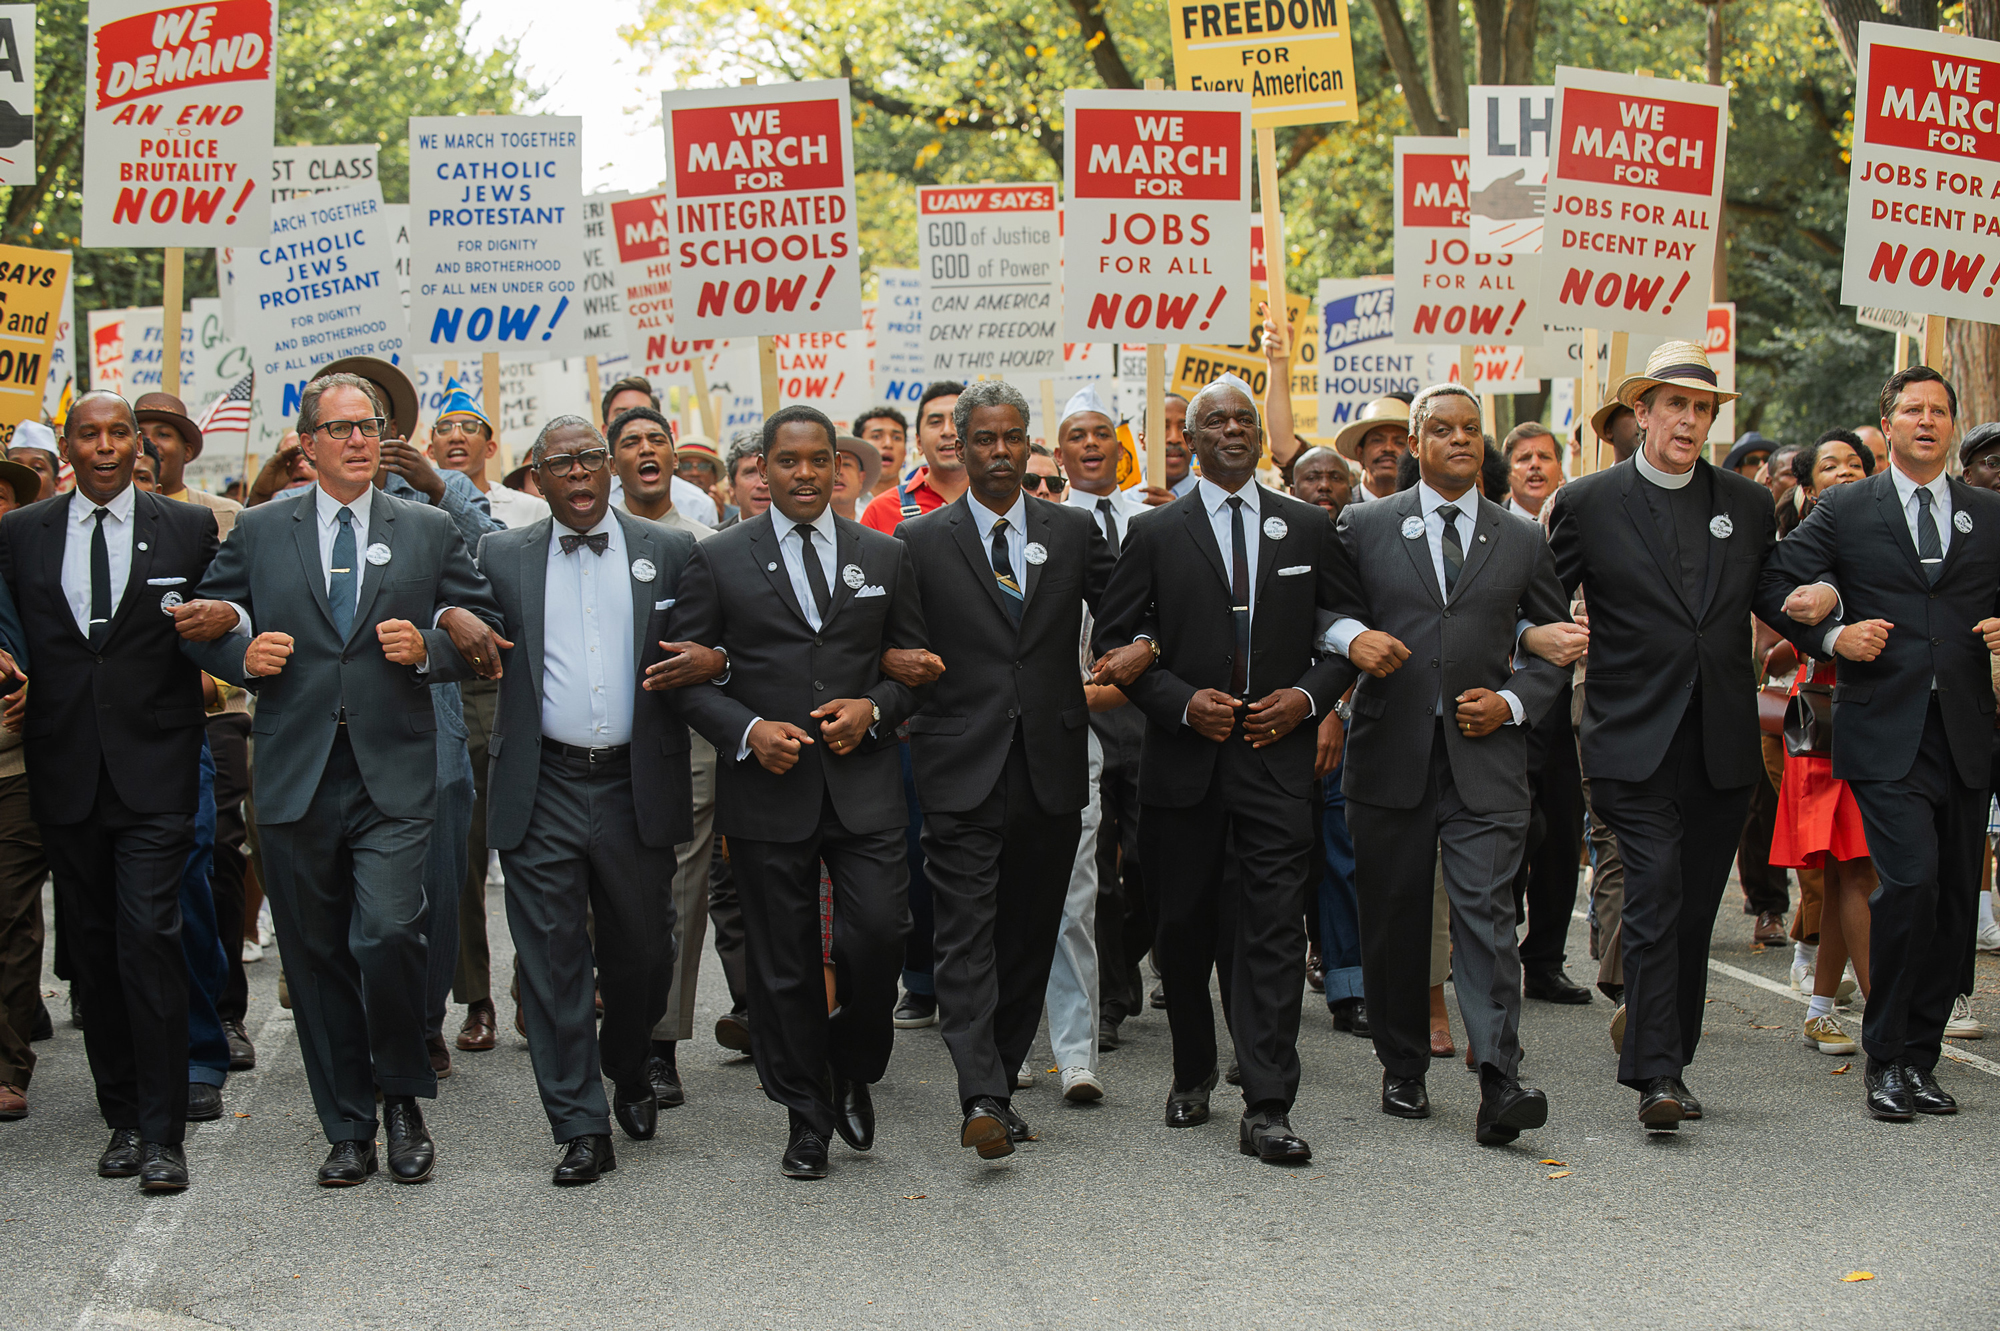 A group of men march arm in arm with posters for civil rights and integration